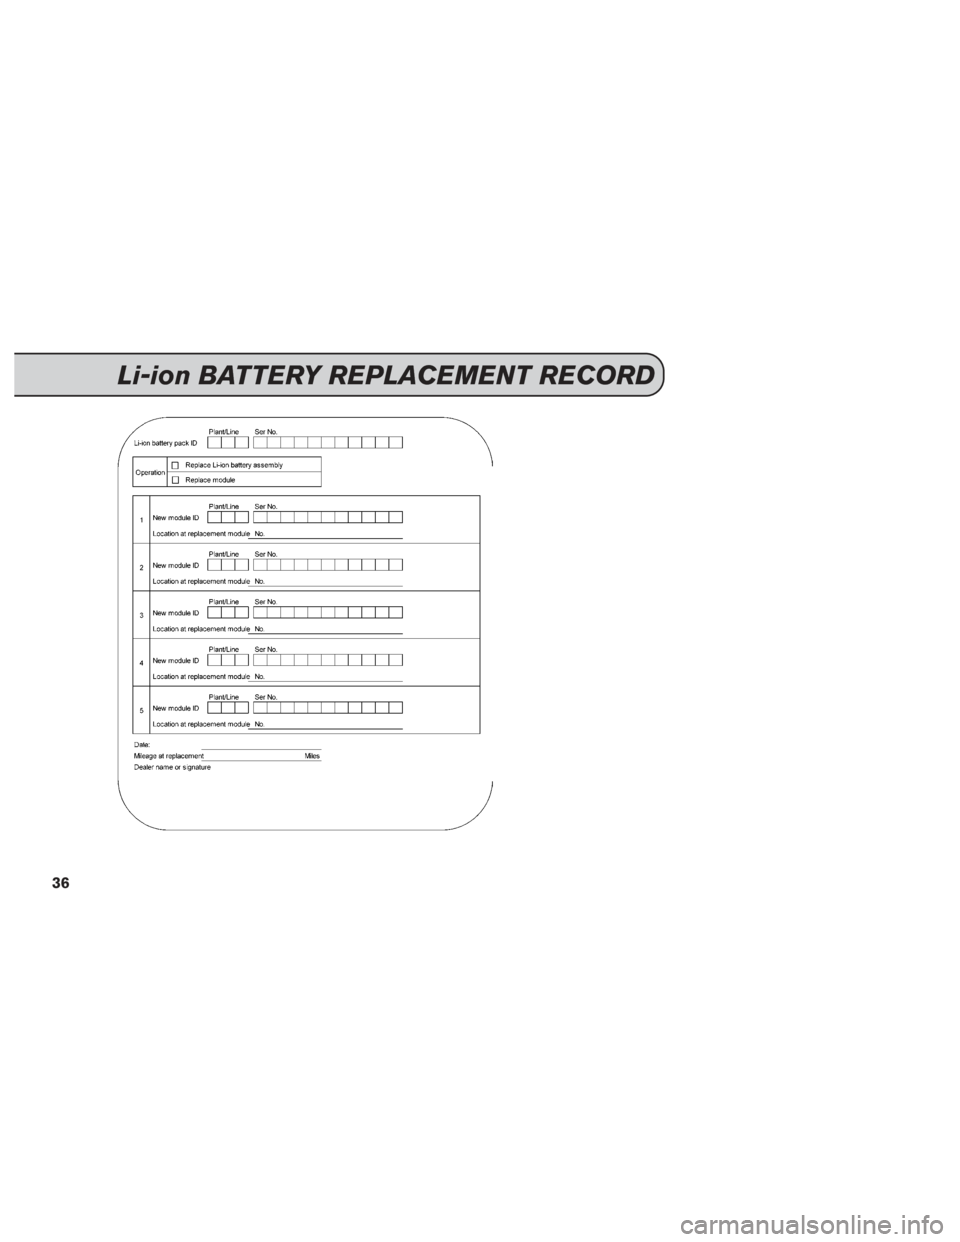 NISSAN LEAF 2013 1.G Service And Maintenance Guide Li-ion BATTERY REPLACEMENT RECORD
36 